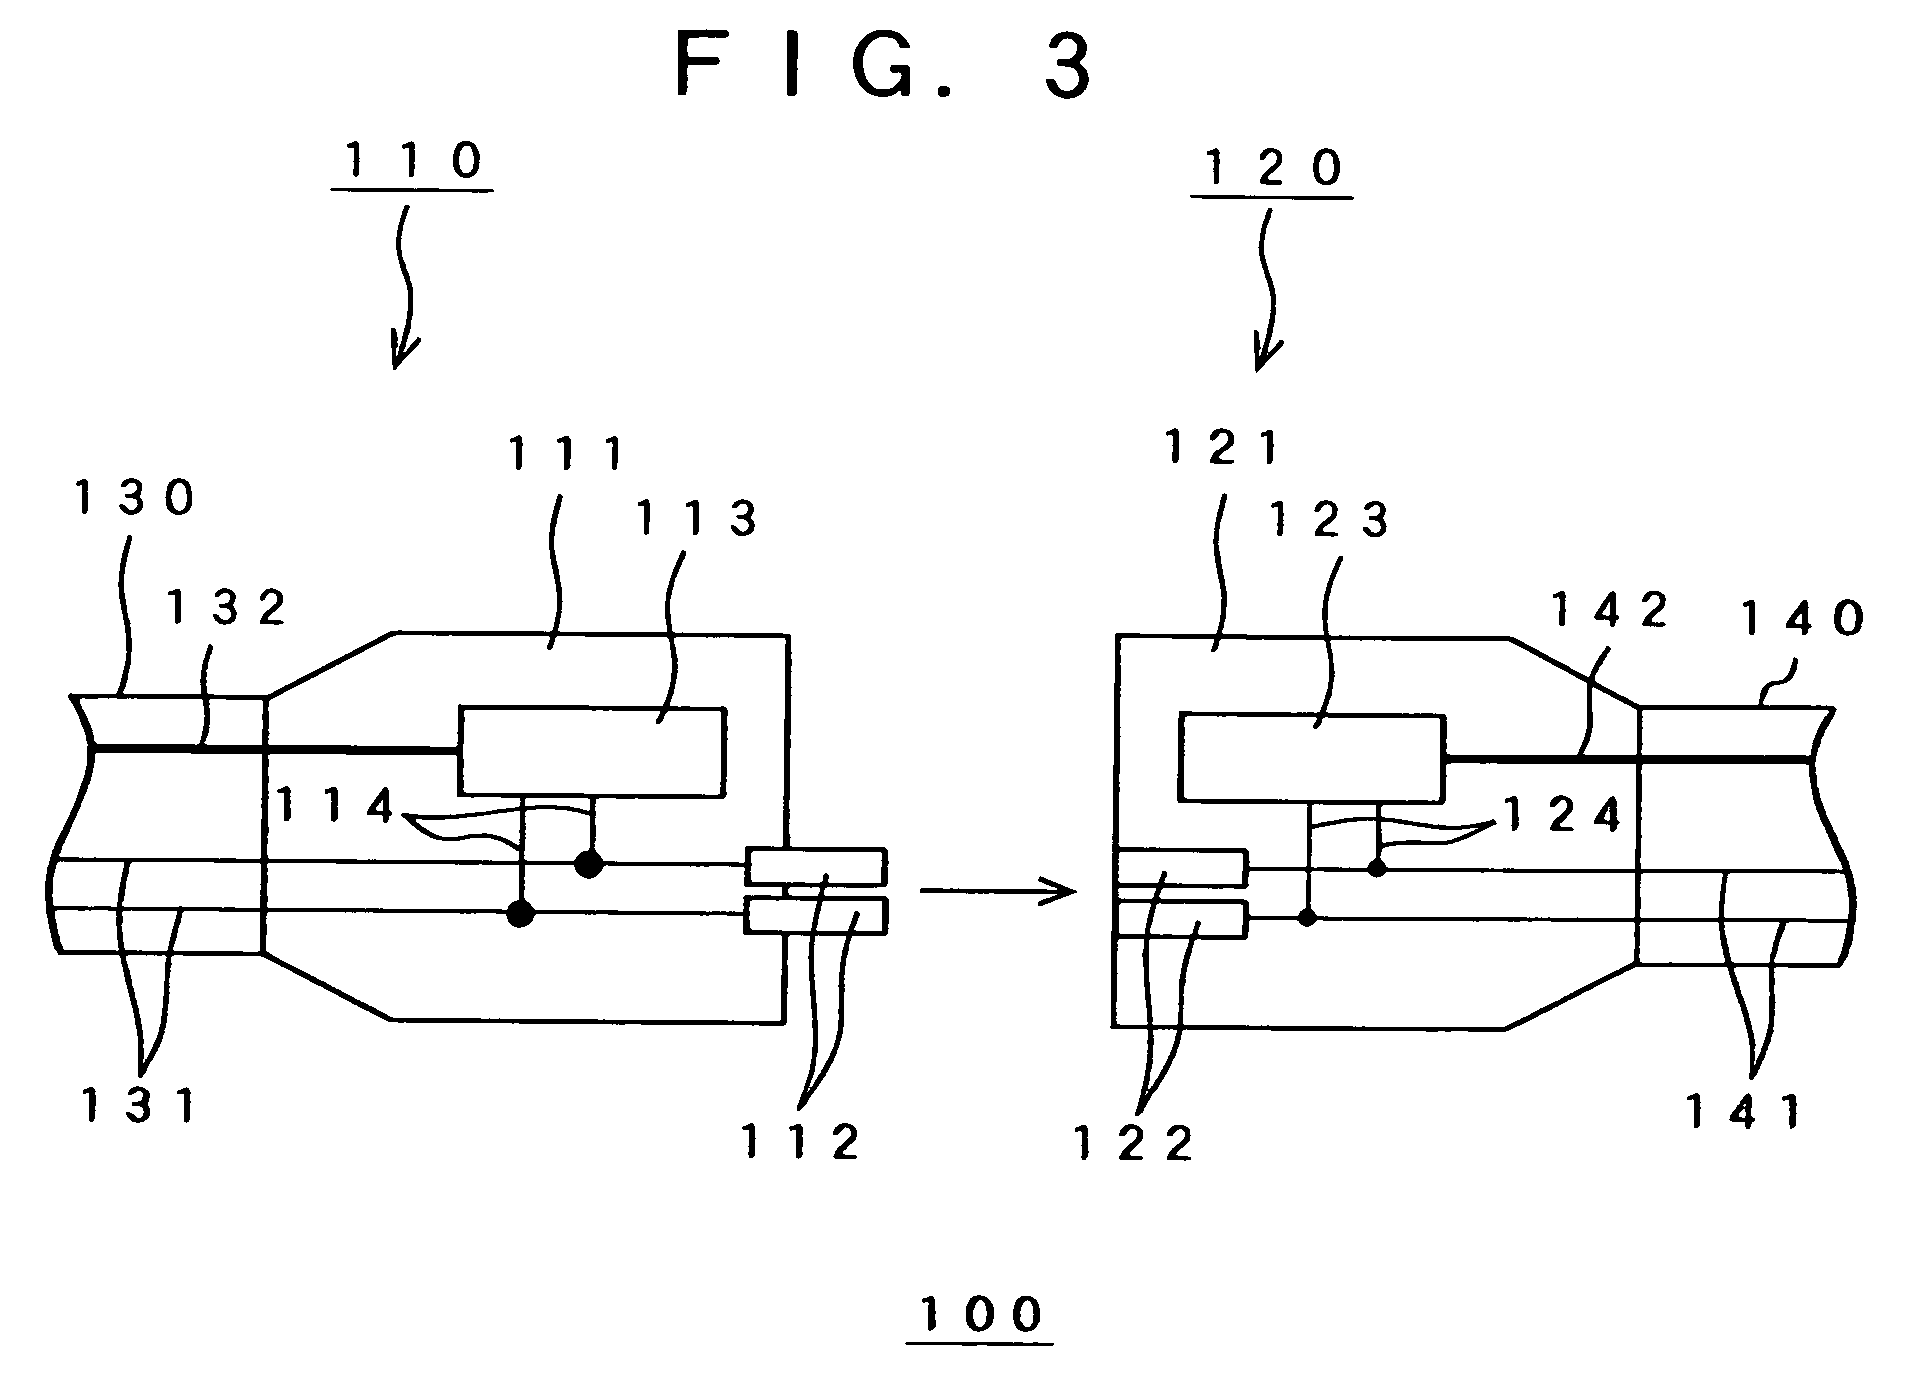 Electro-optical composite connector, electro-optical composite cable, and network devices using the same